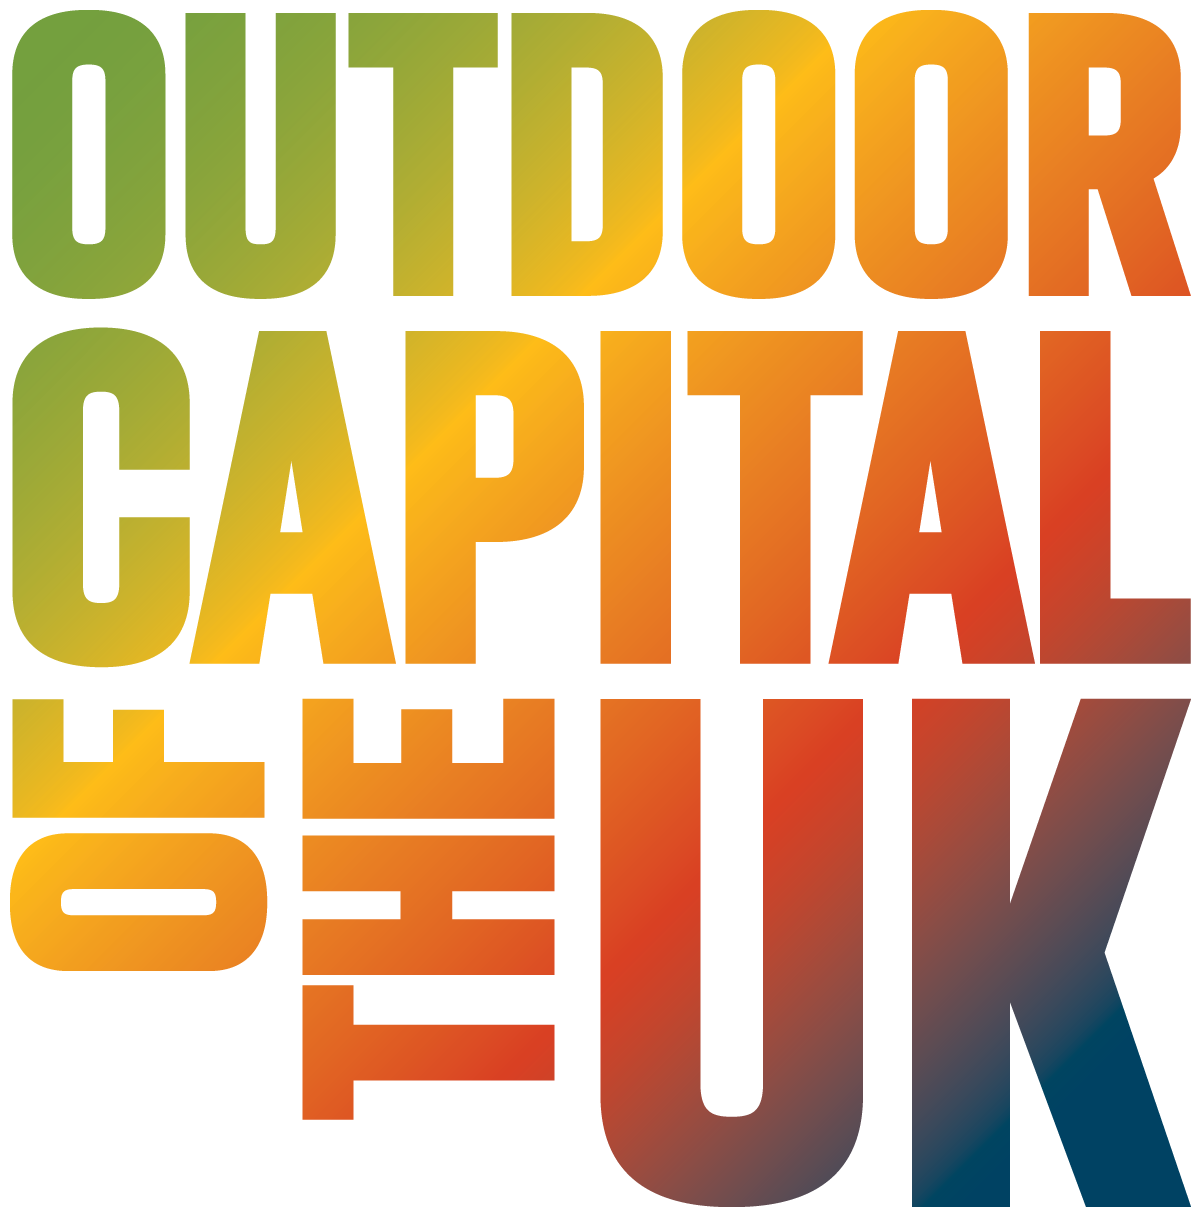 Outdoor capital of the UK